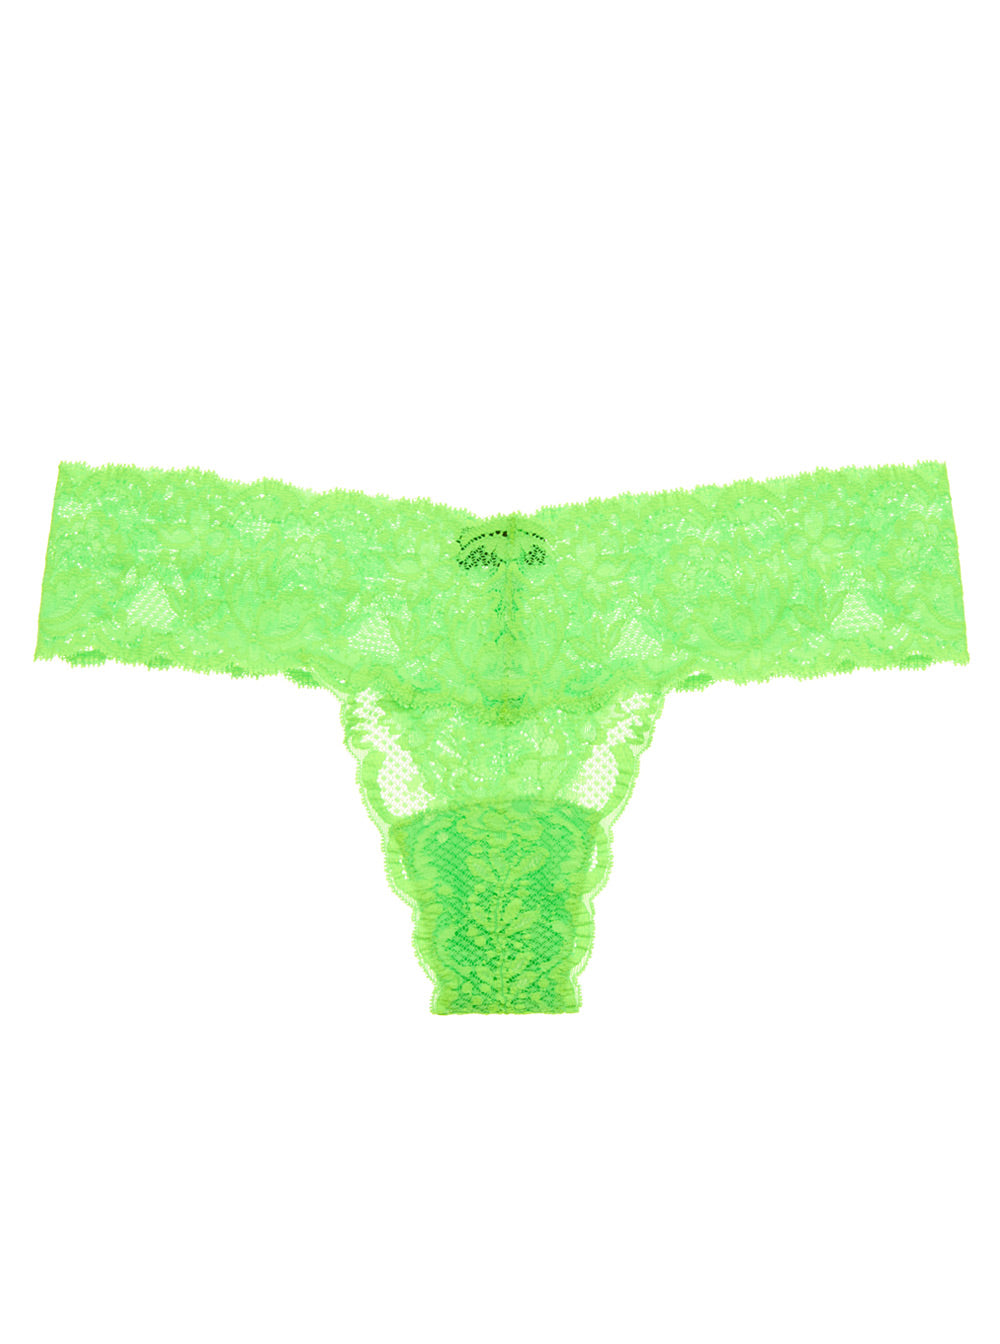 Thong Four Pack - Neon Brights  Sustainable TENCEL™ Lace